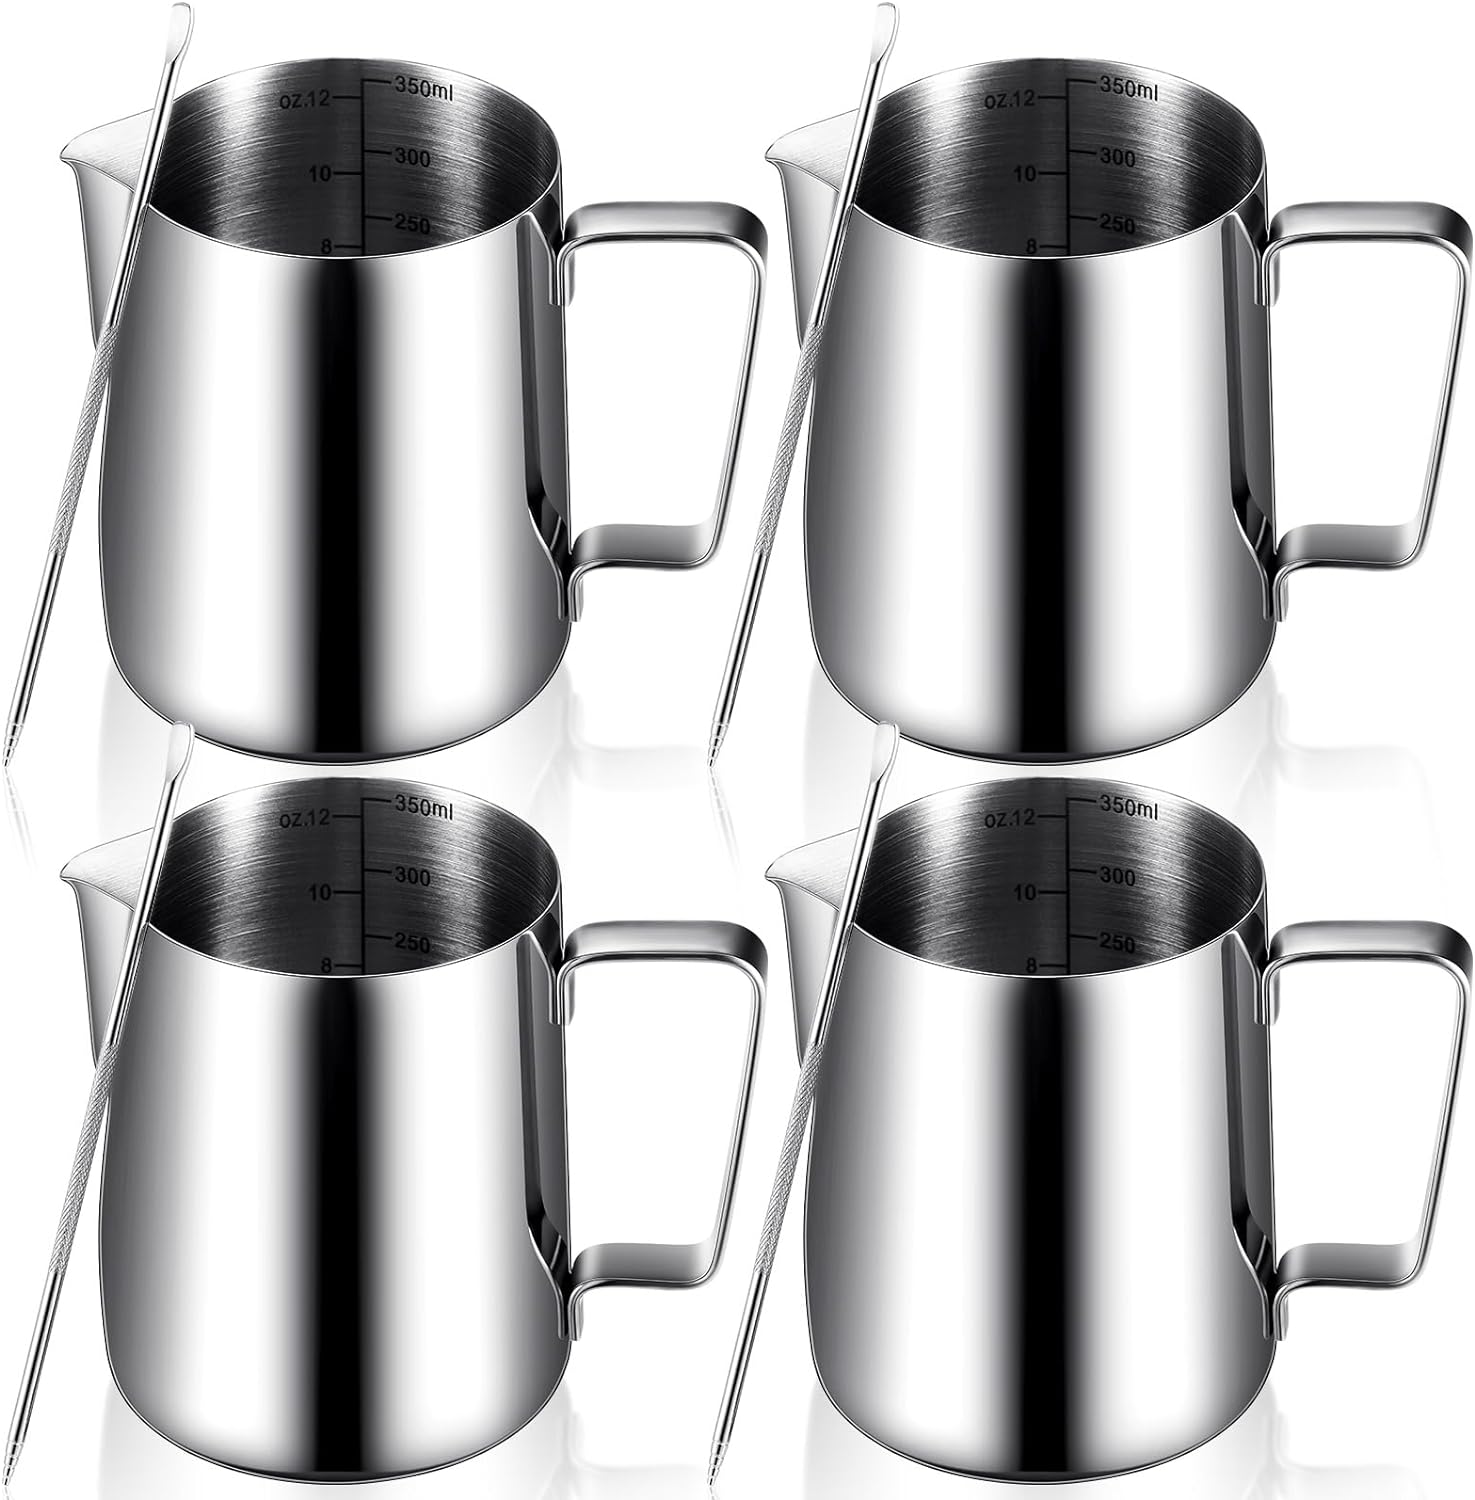 4 Pcs Milk Frothing Pitcher 12 oz Espresso Steaming Pitcher Milk Frother Cup with Latte Art Pen Stainless Steel Coffee Bar Espresso Machine Accessories Cappuccino Barista Tools Milk Jug Cup